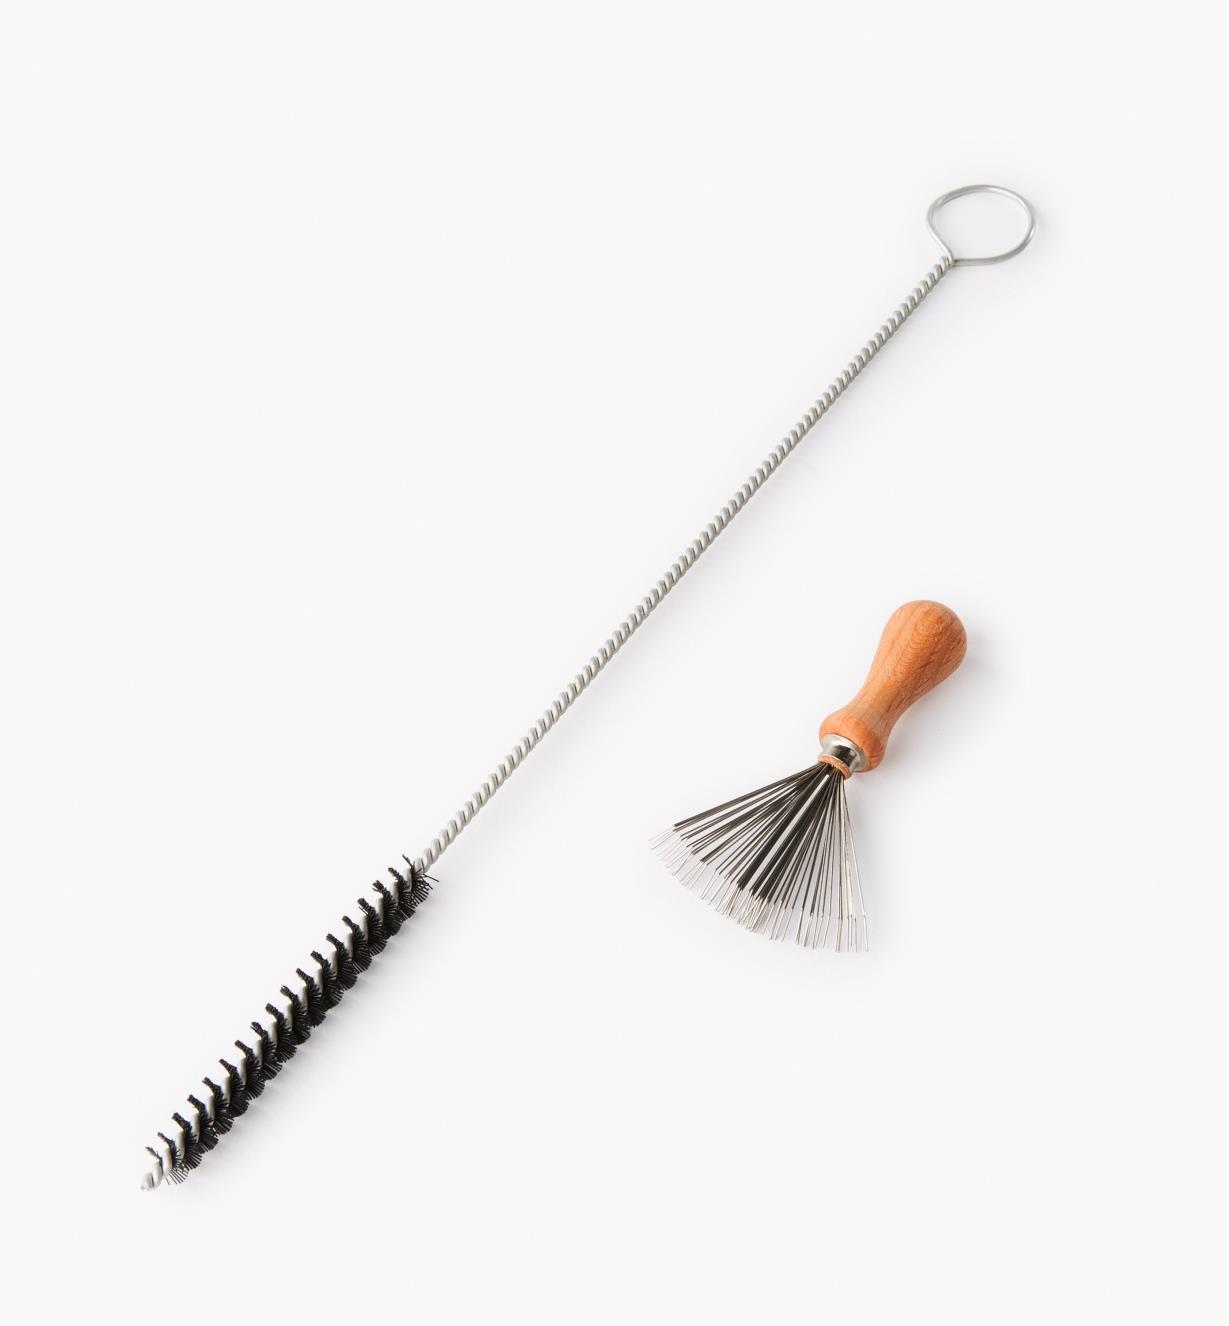 Good Brushes for Unpleasant Jobs